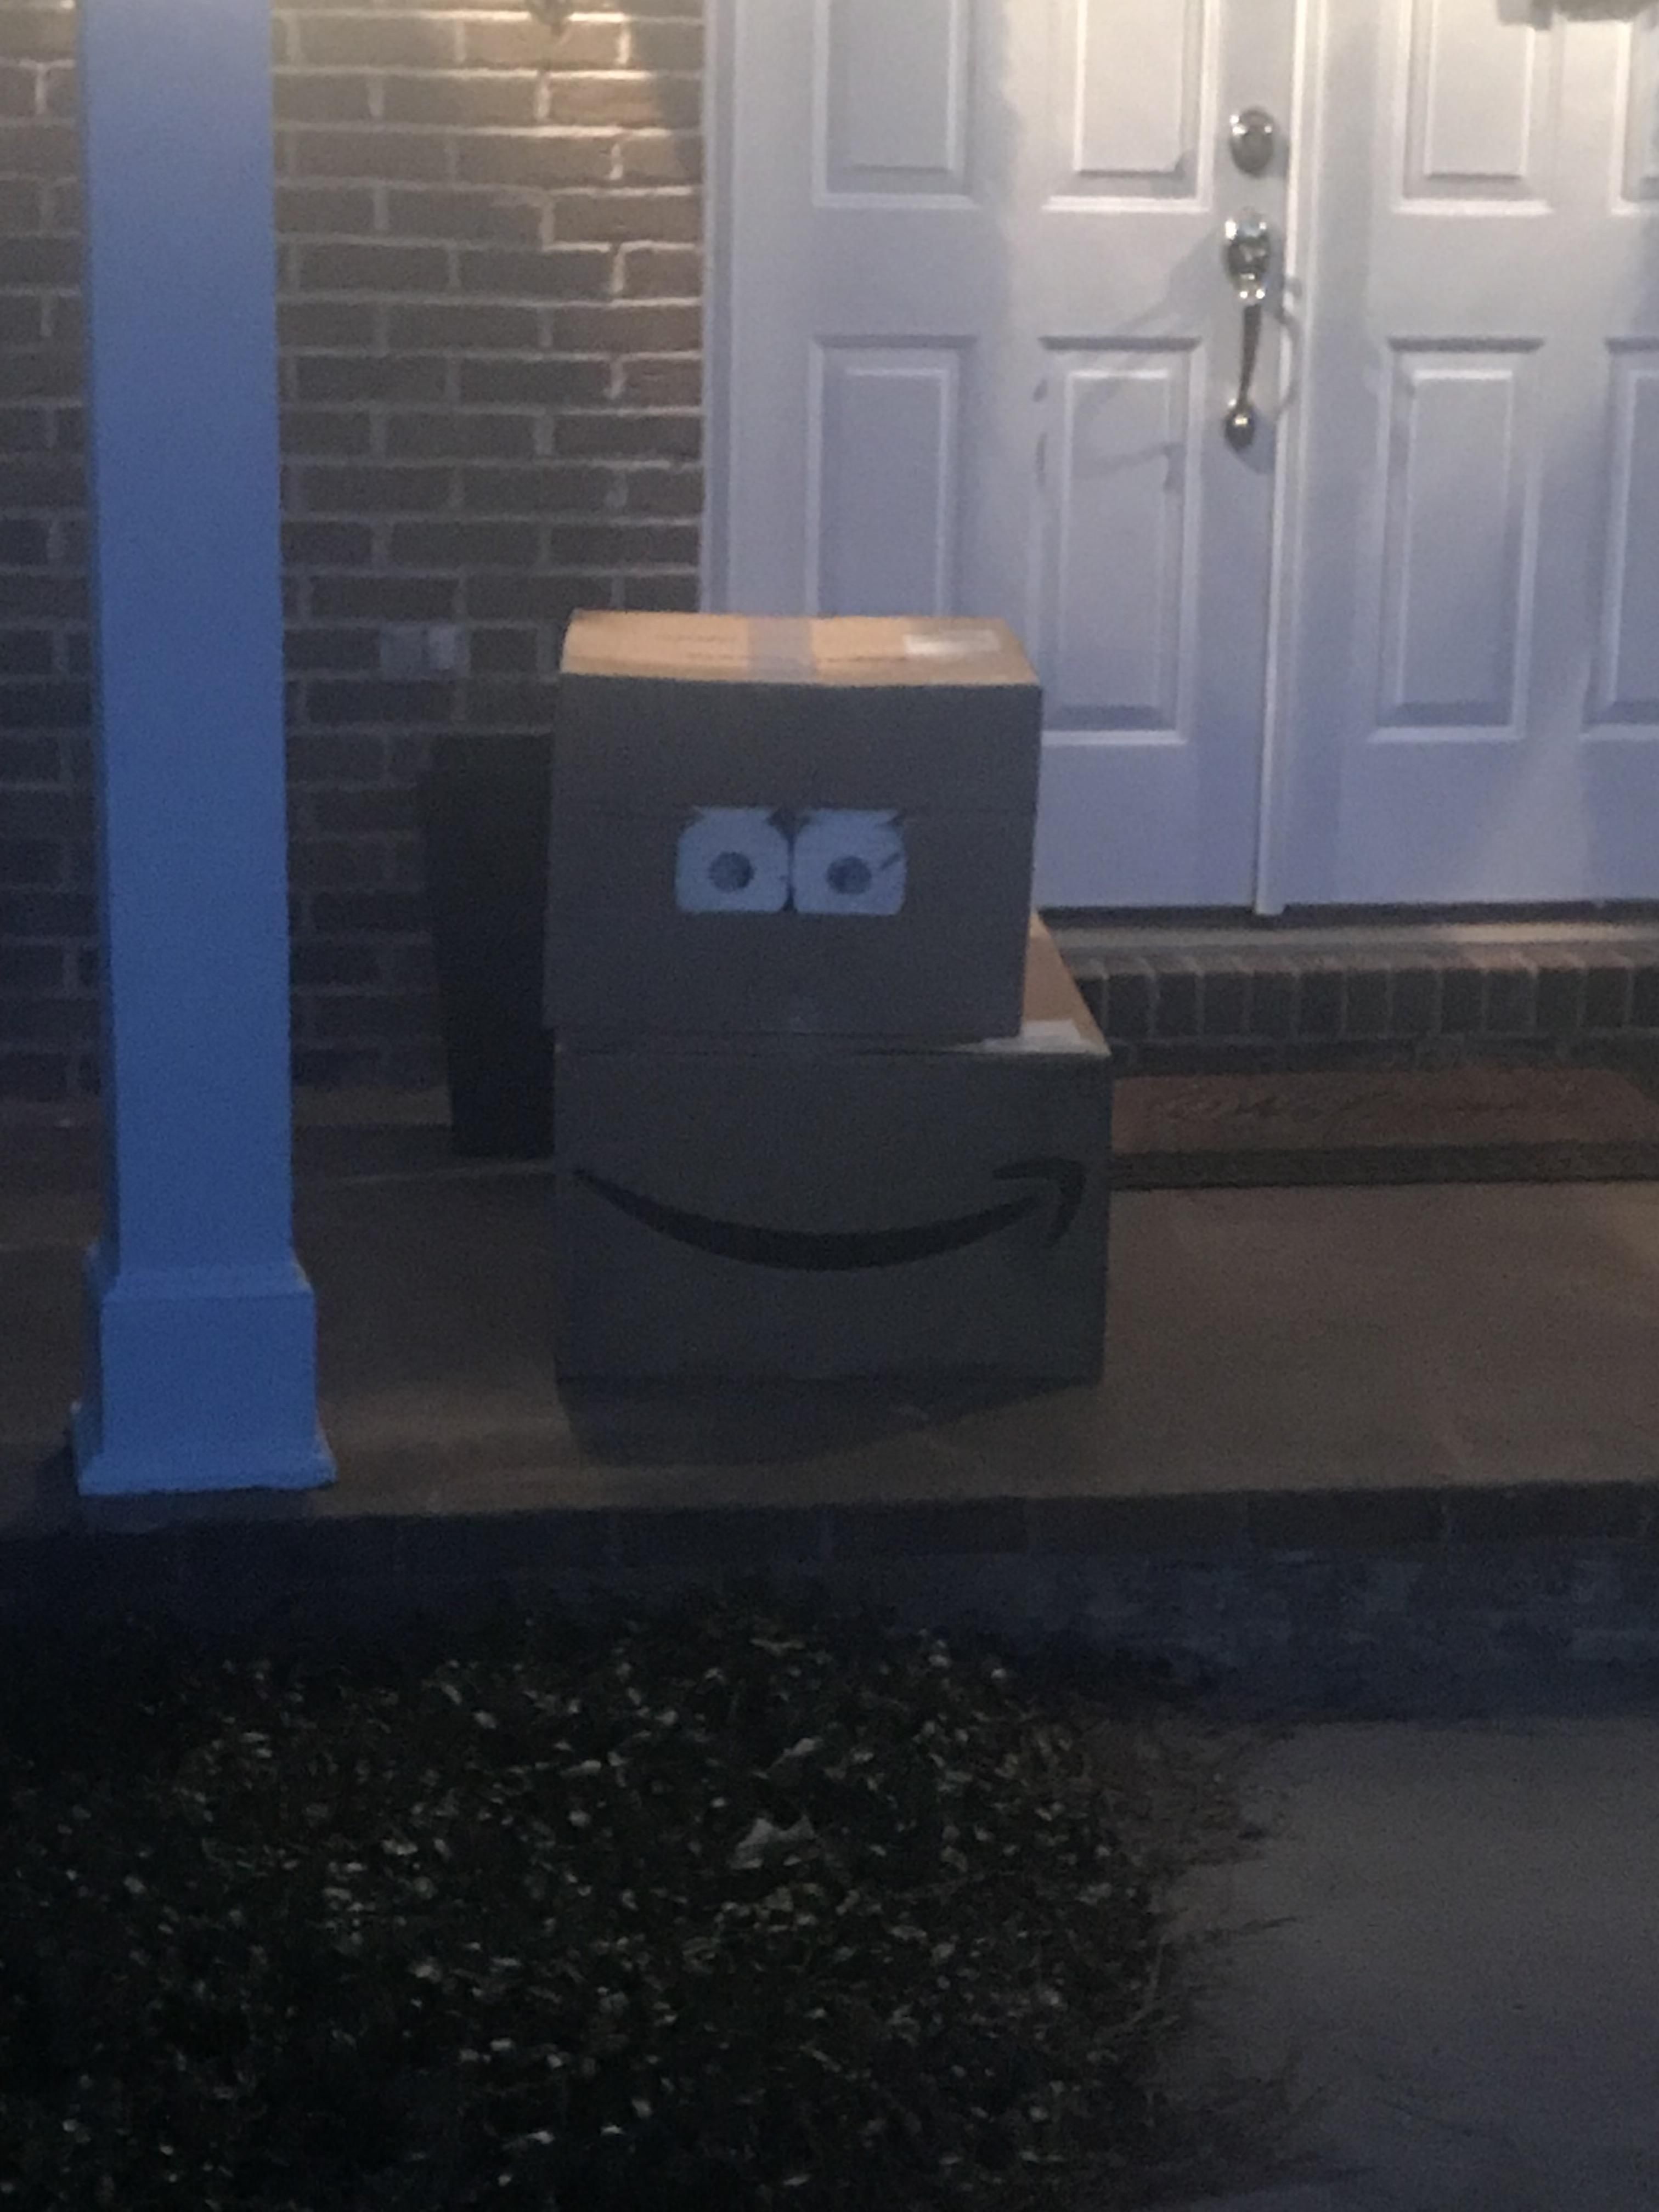 Well played UPS man, well played.